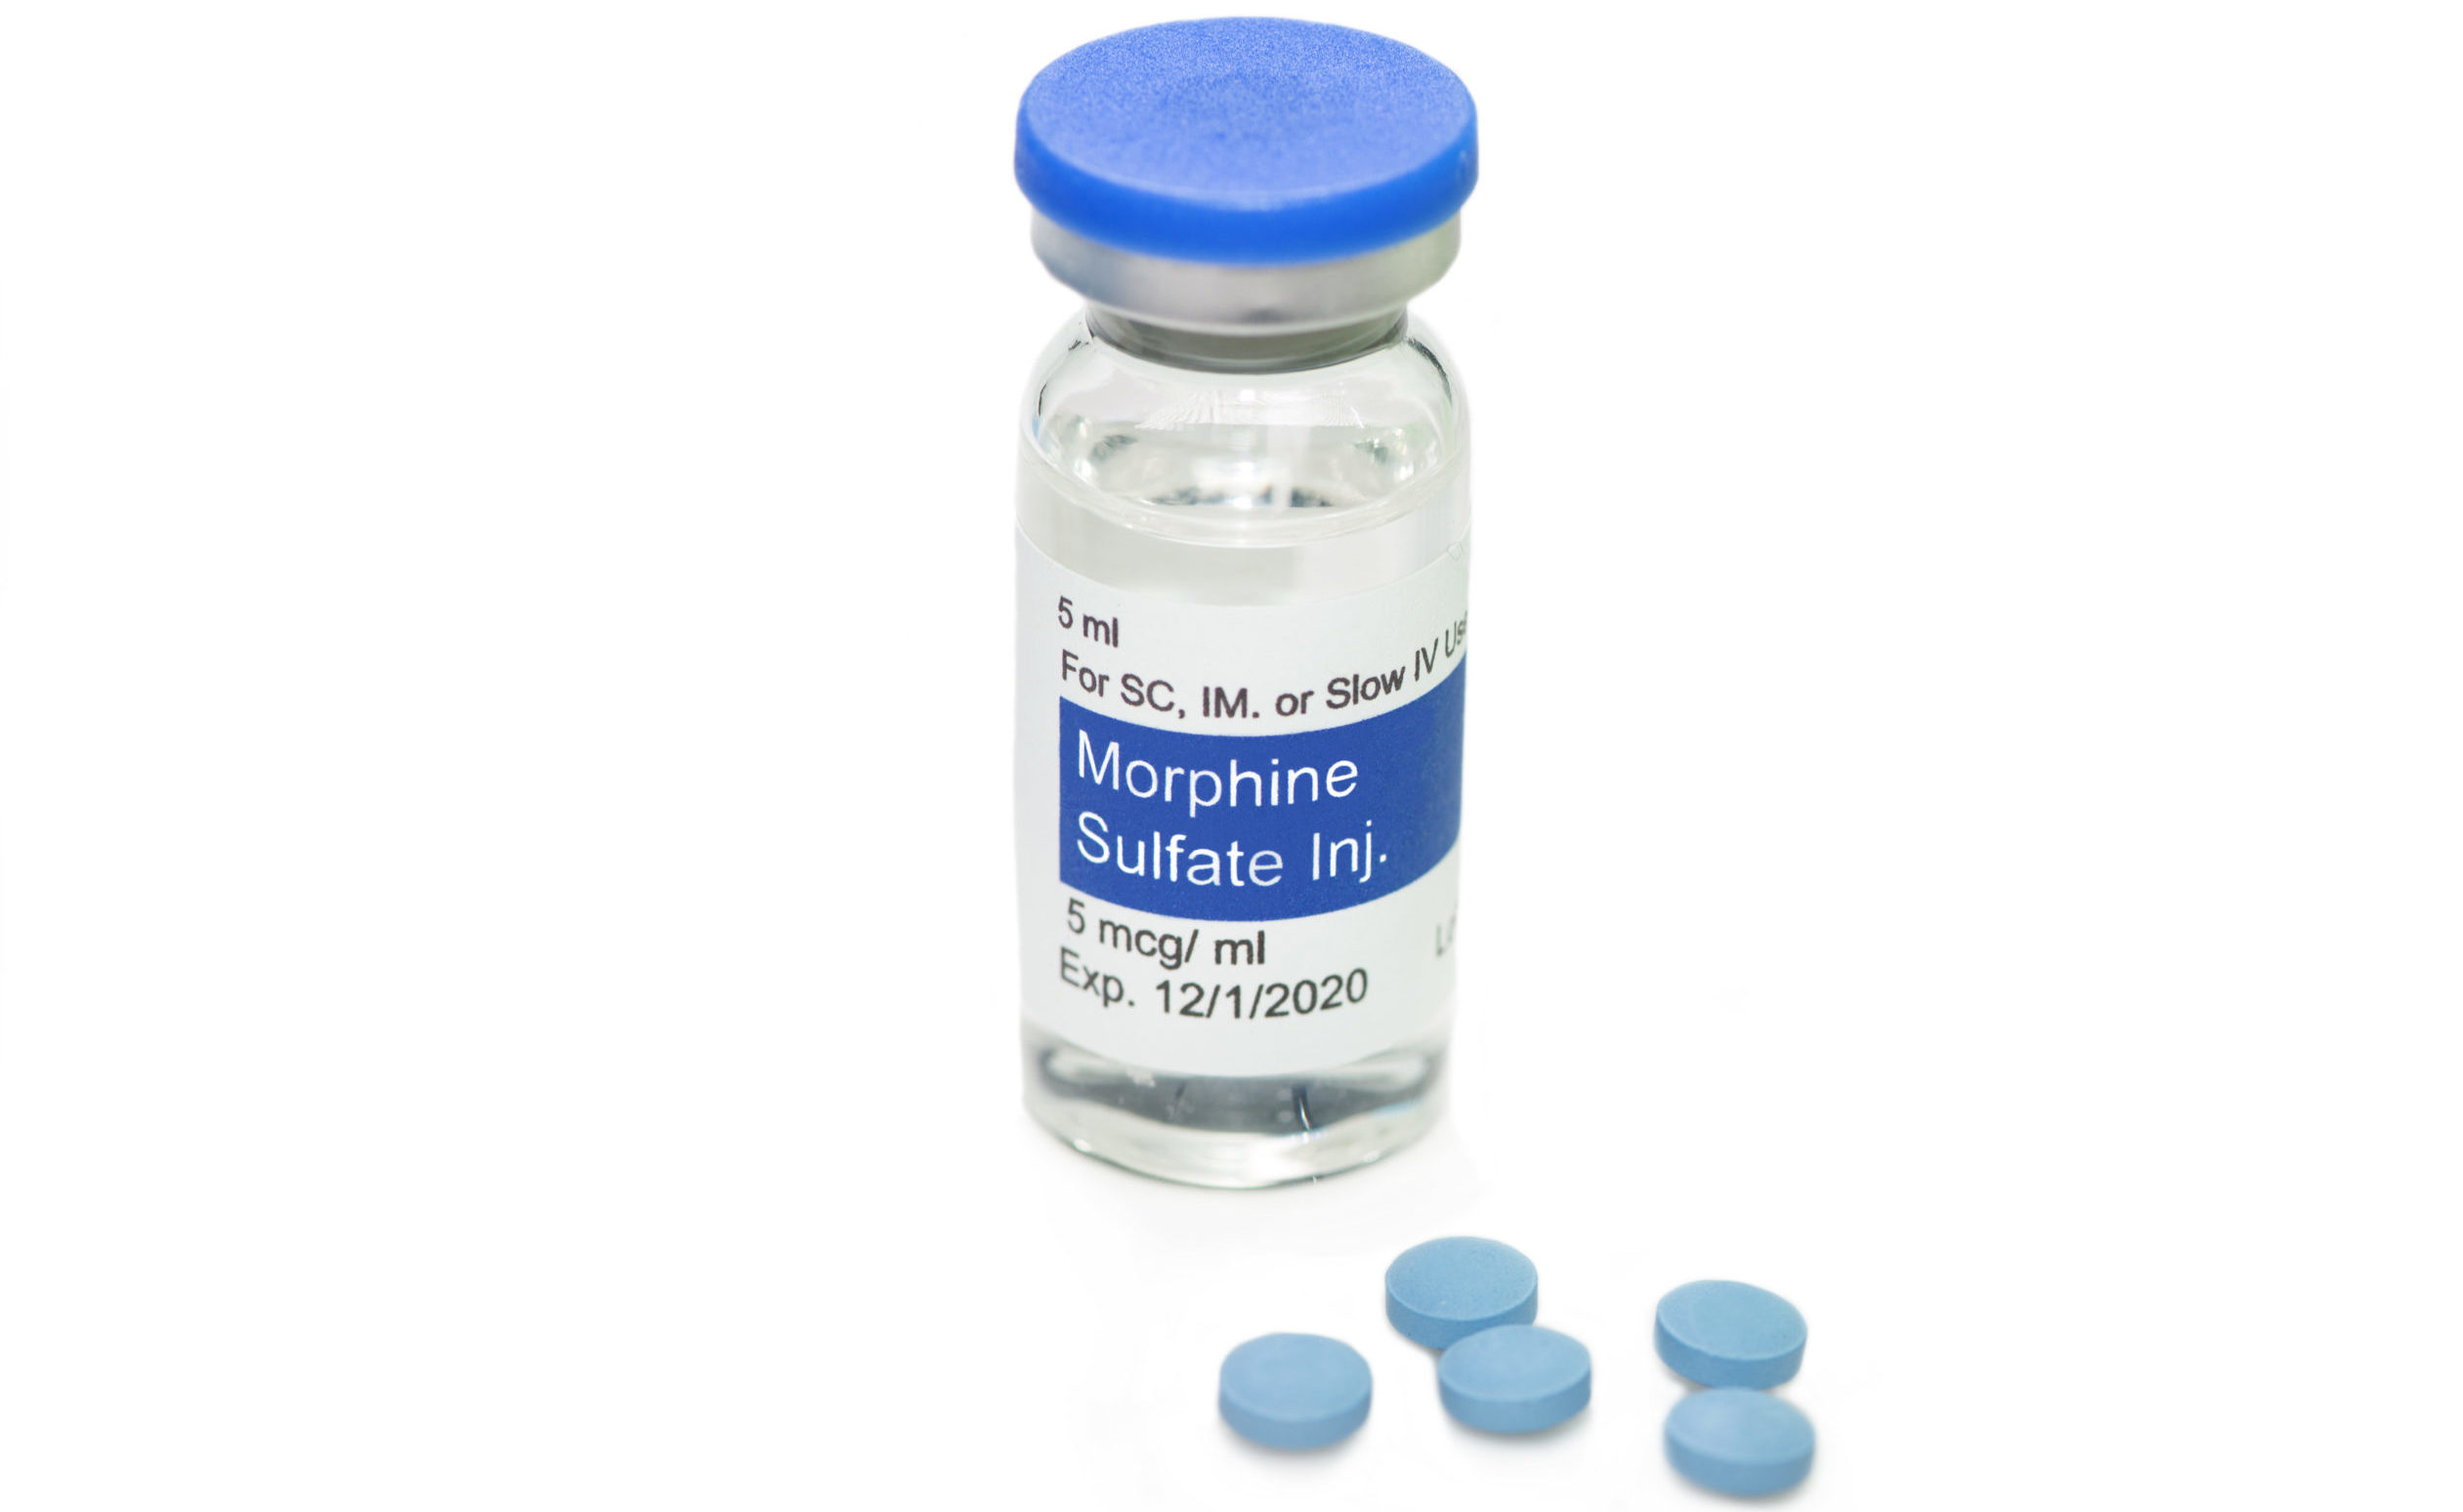 ethics of pain management - Morphine vial and blue morphine pills on white background